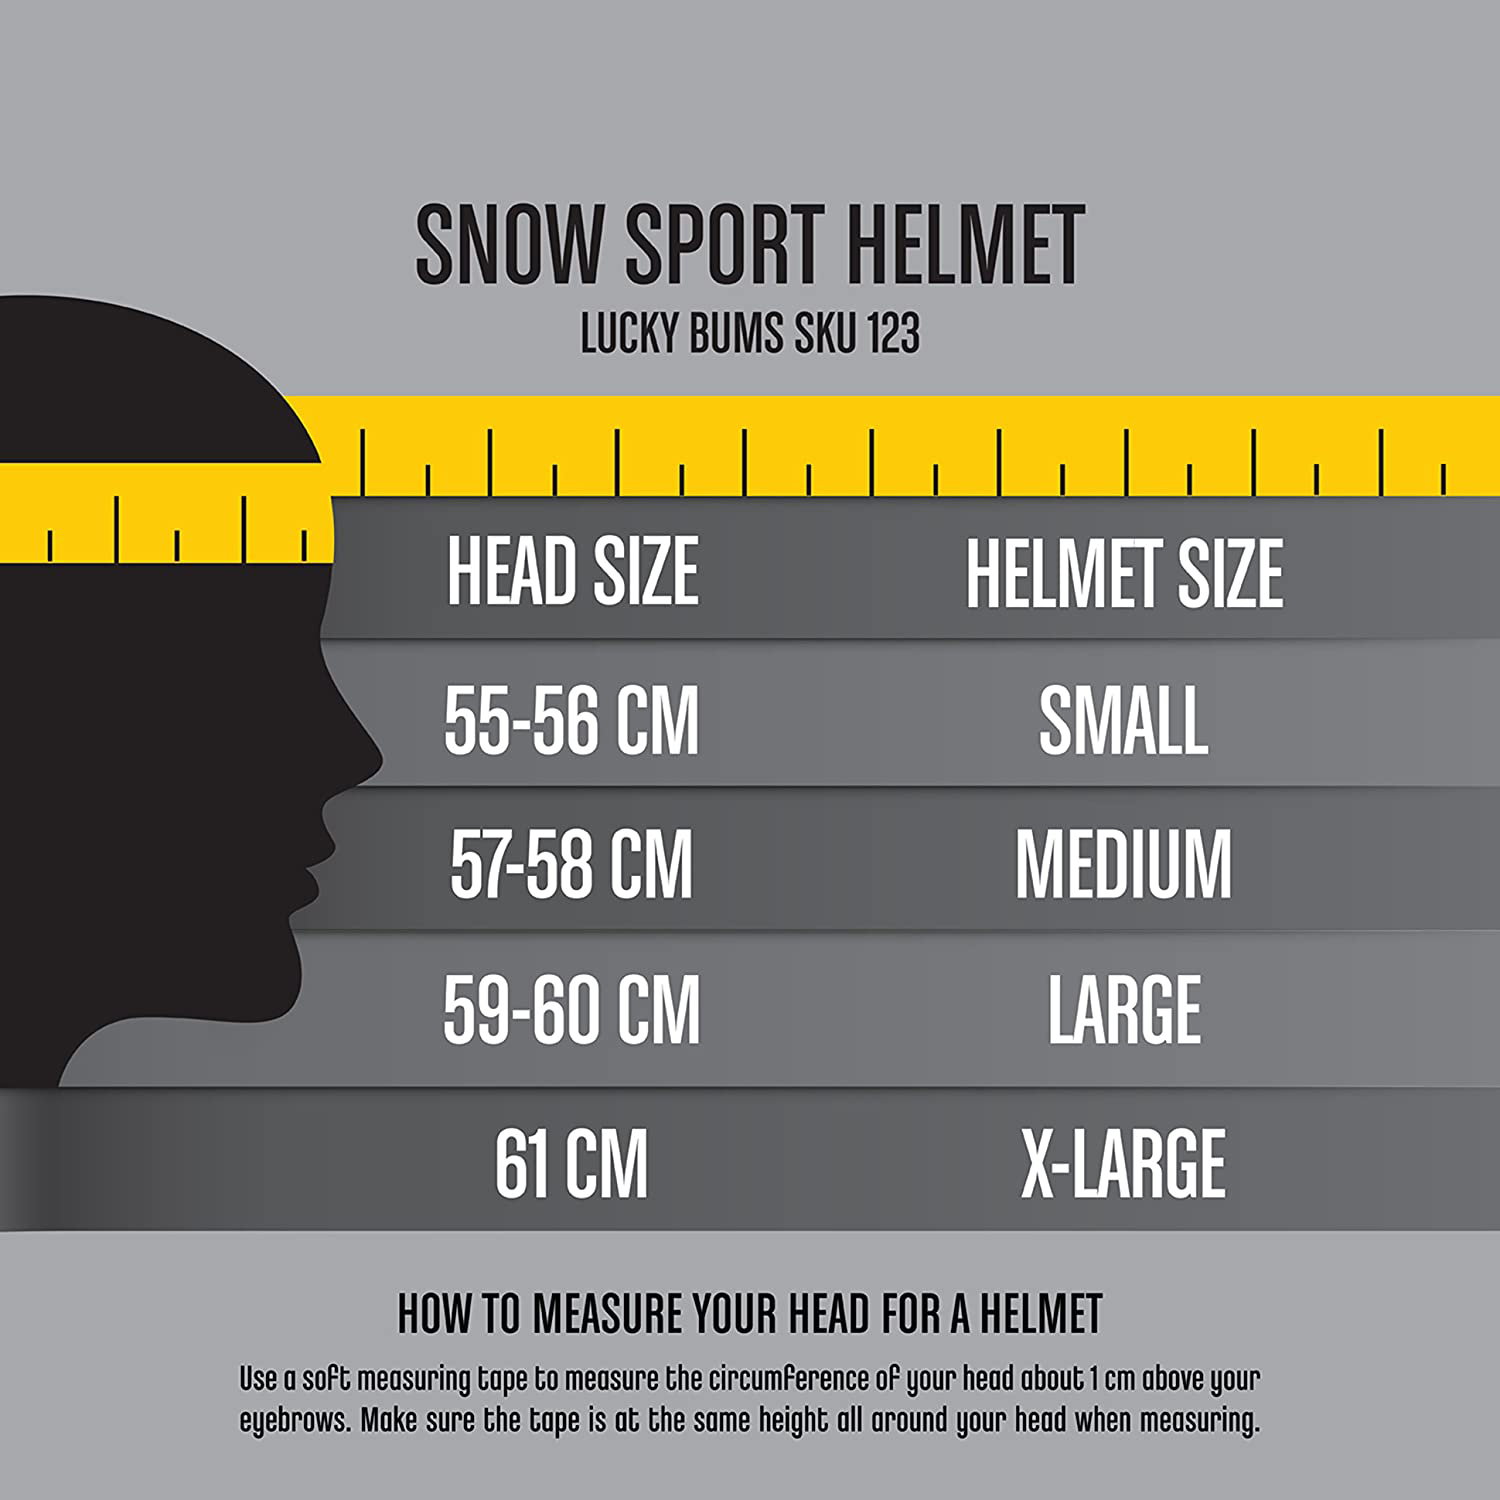 Lucky bums. Размер large шлема. Lucky Bums Helmet sizing. 509 Helmet Size Chart. Driver Boeri шлем.